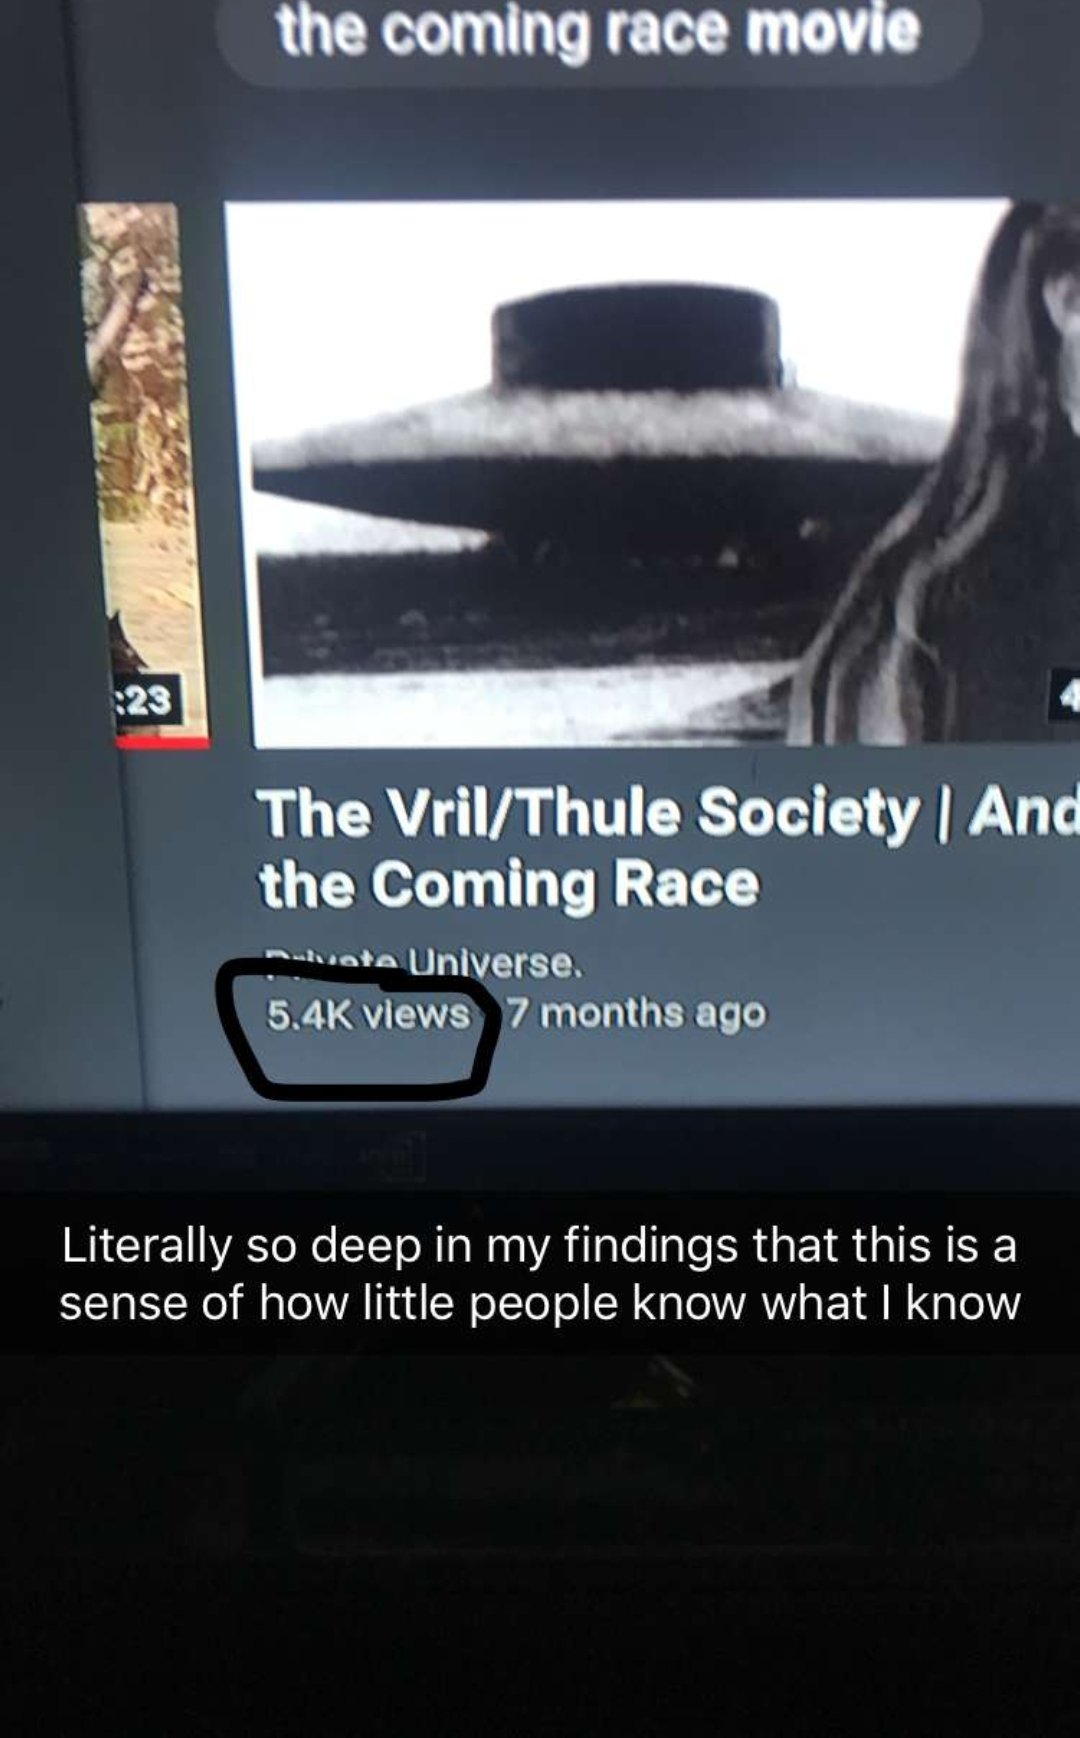 multimedia - the coming race movie The VrilThule Society And the Coming Race muate Universe. views 7 months ago Literally so deep in my findings that this is a sense of how little people know what I know